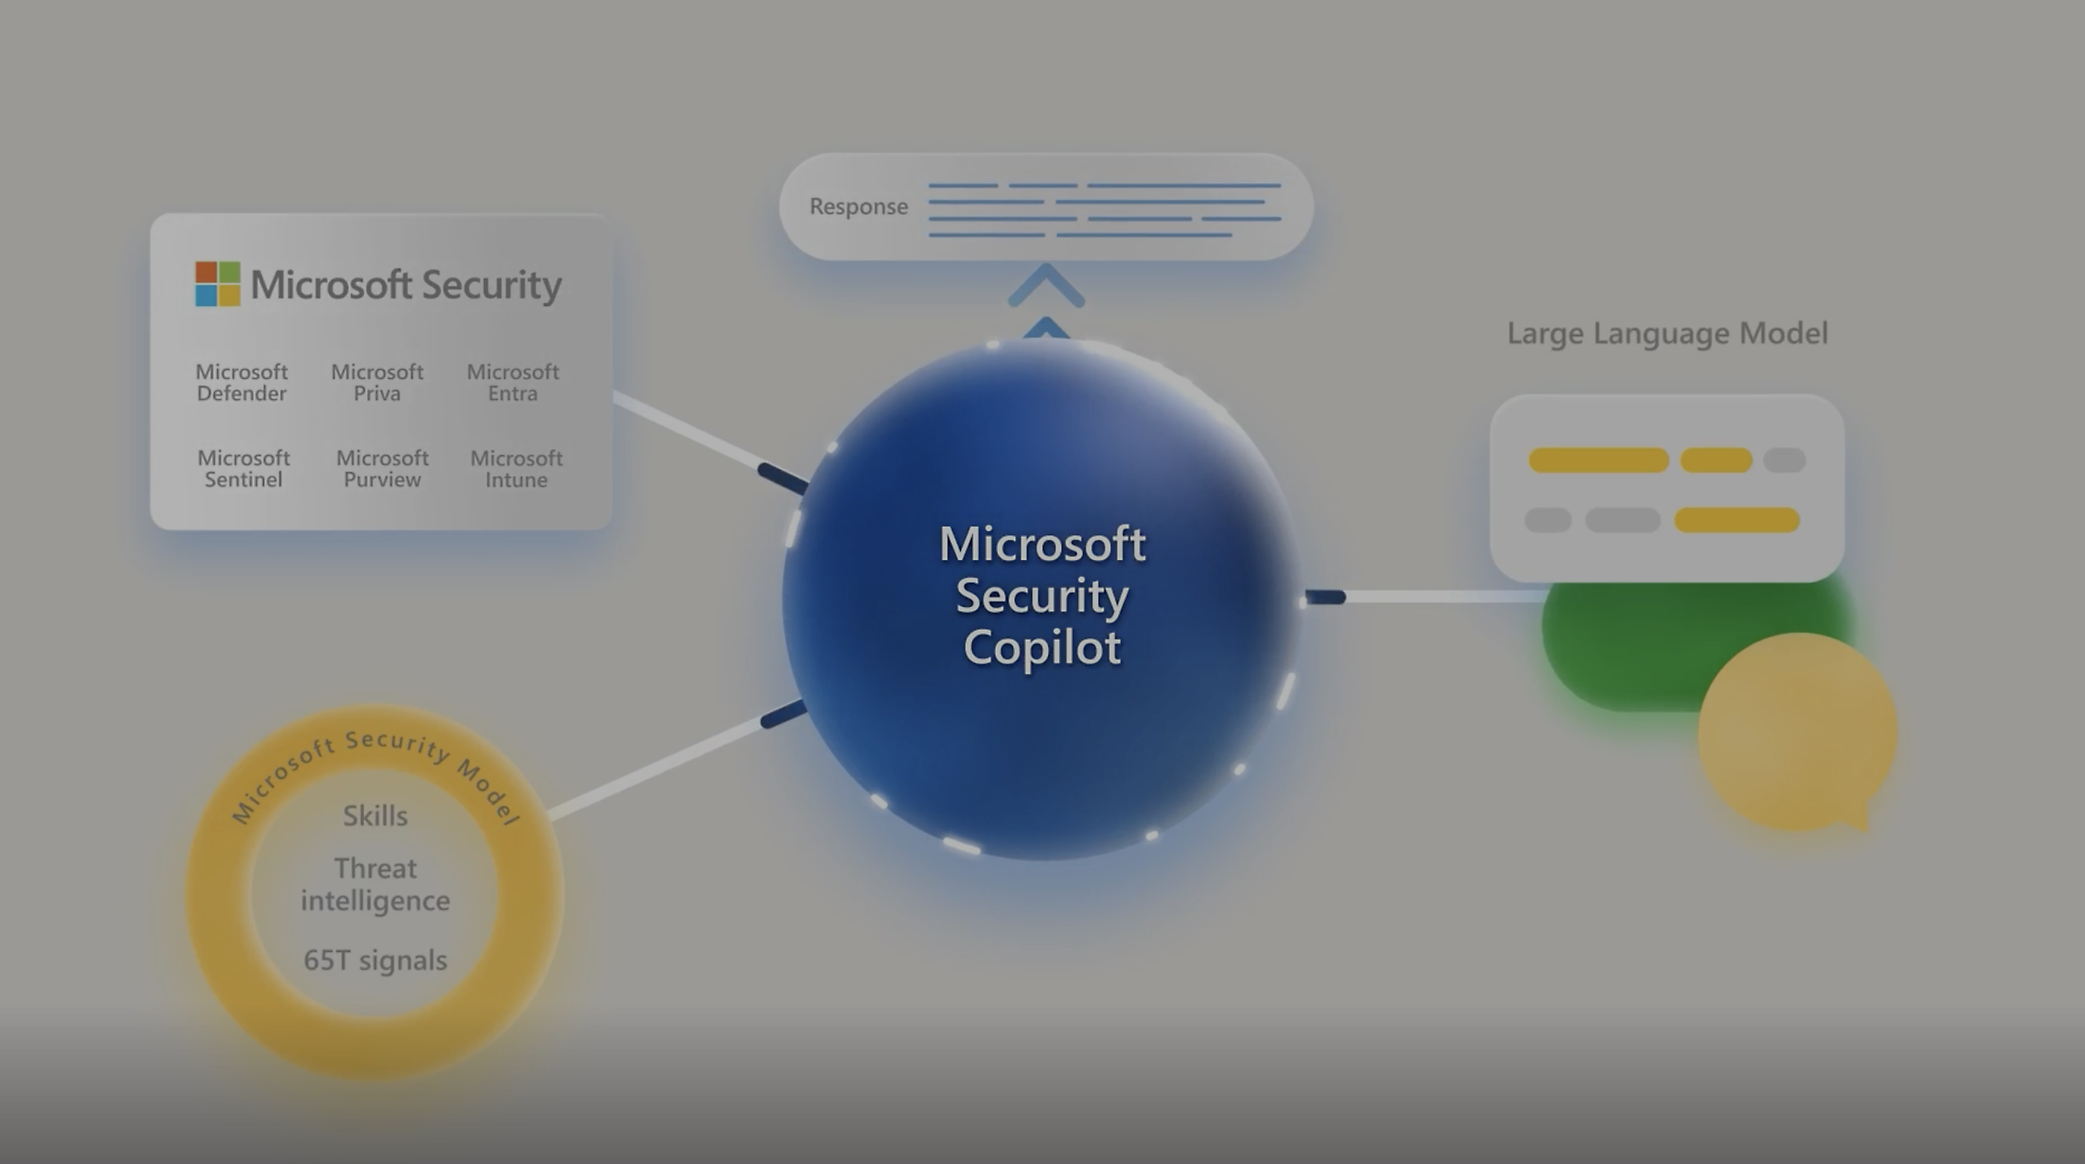 Microsoft Security: Defender, Entra, Sentinel, Priva, Purview, Intune, Copilot, Threat Intelligence, 65T-Signale